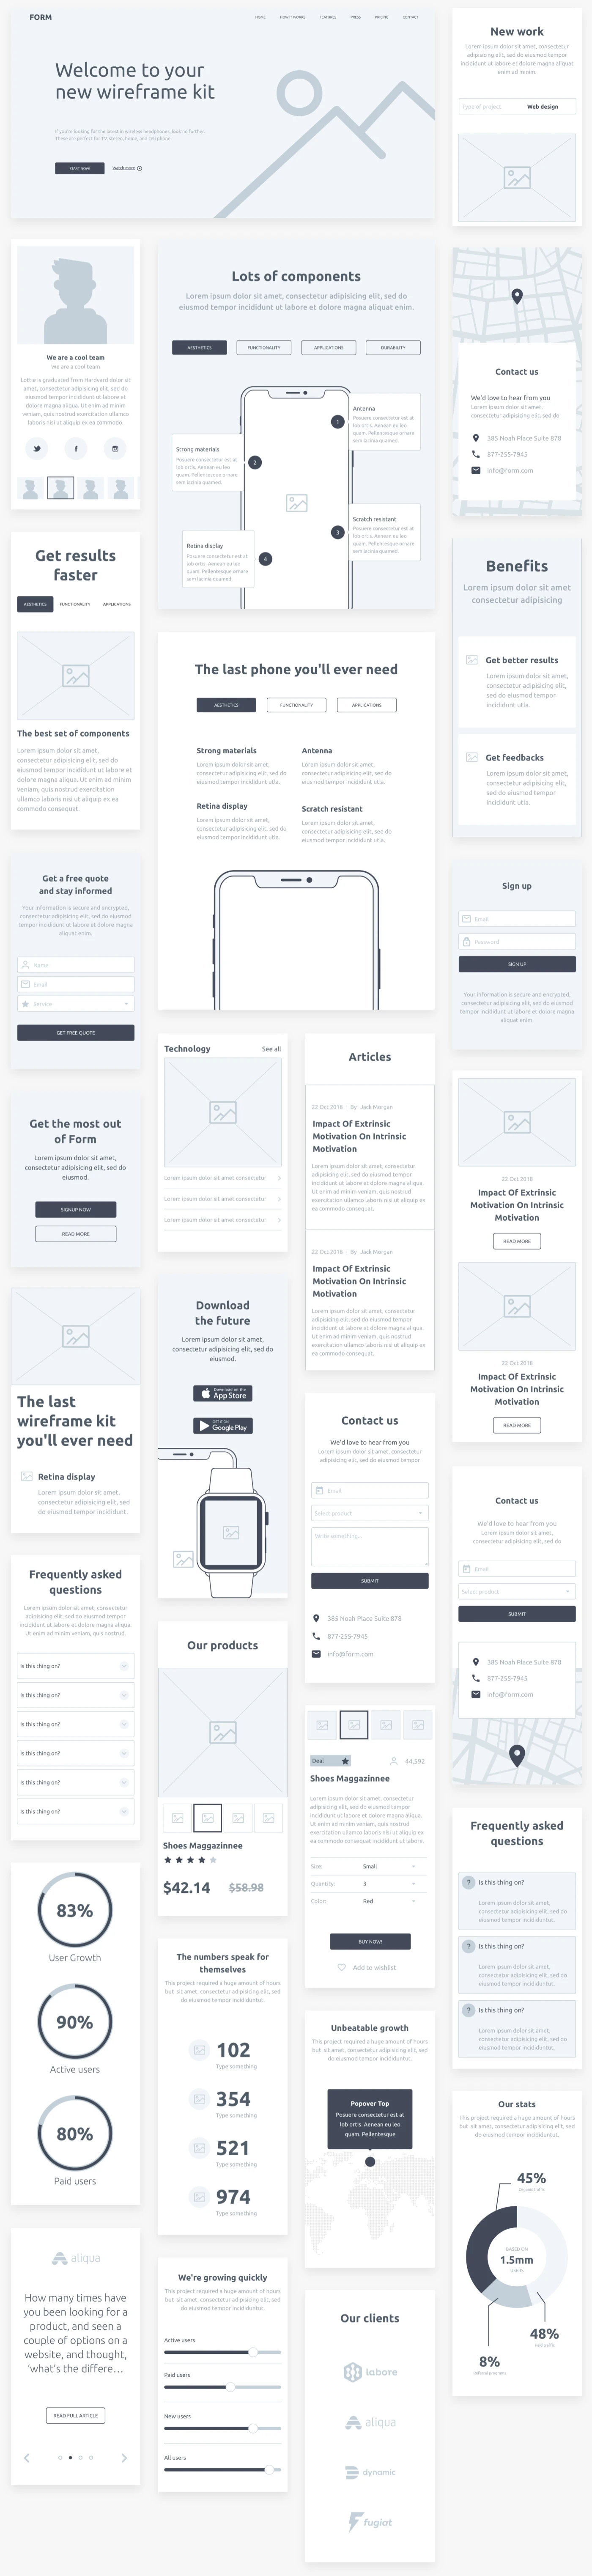 Form - Wireframe kit from InVision - Form is a free wireframe kit for speeding up your design workflow. Layouts sized for mobile, desktop, and tablet and available in Sketch and PSD formats.